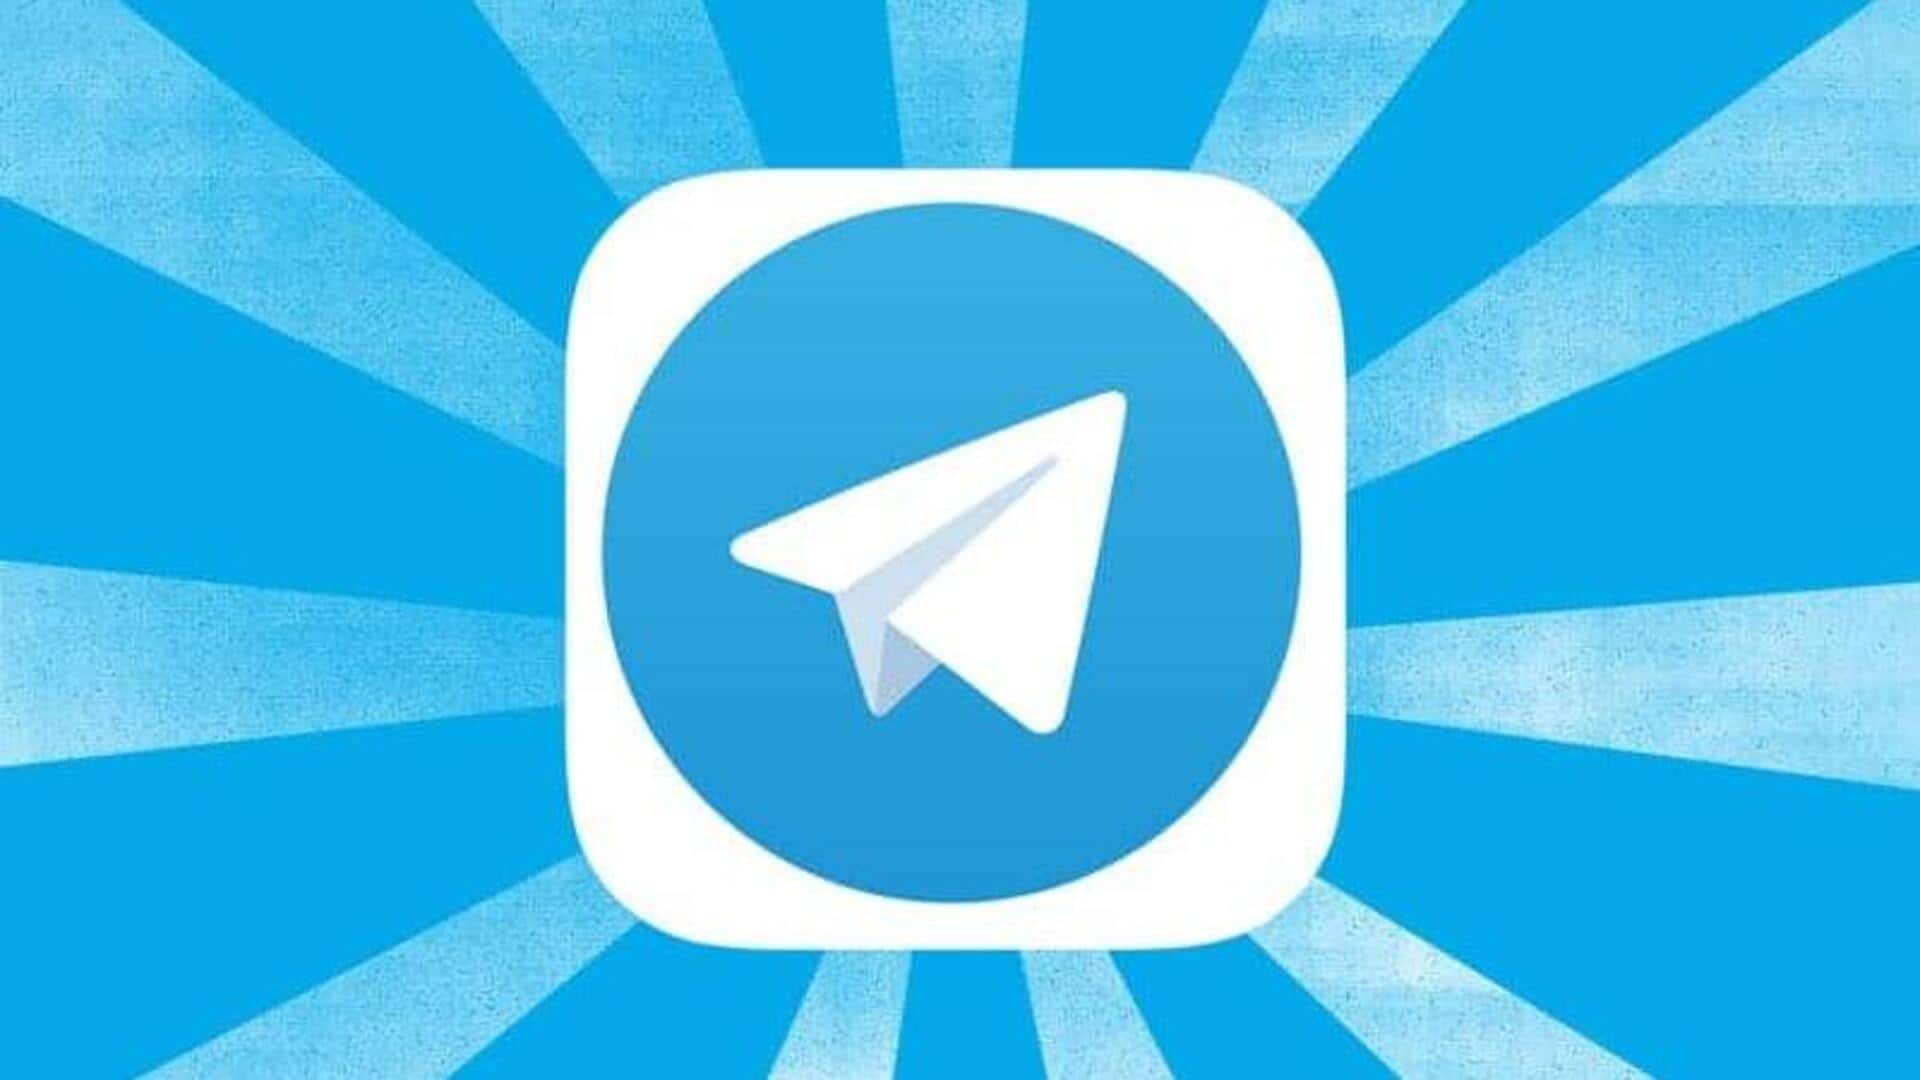 This tool can reveal approximate locations of Telegram users